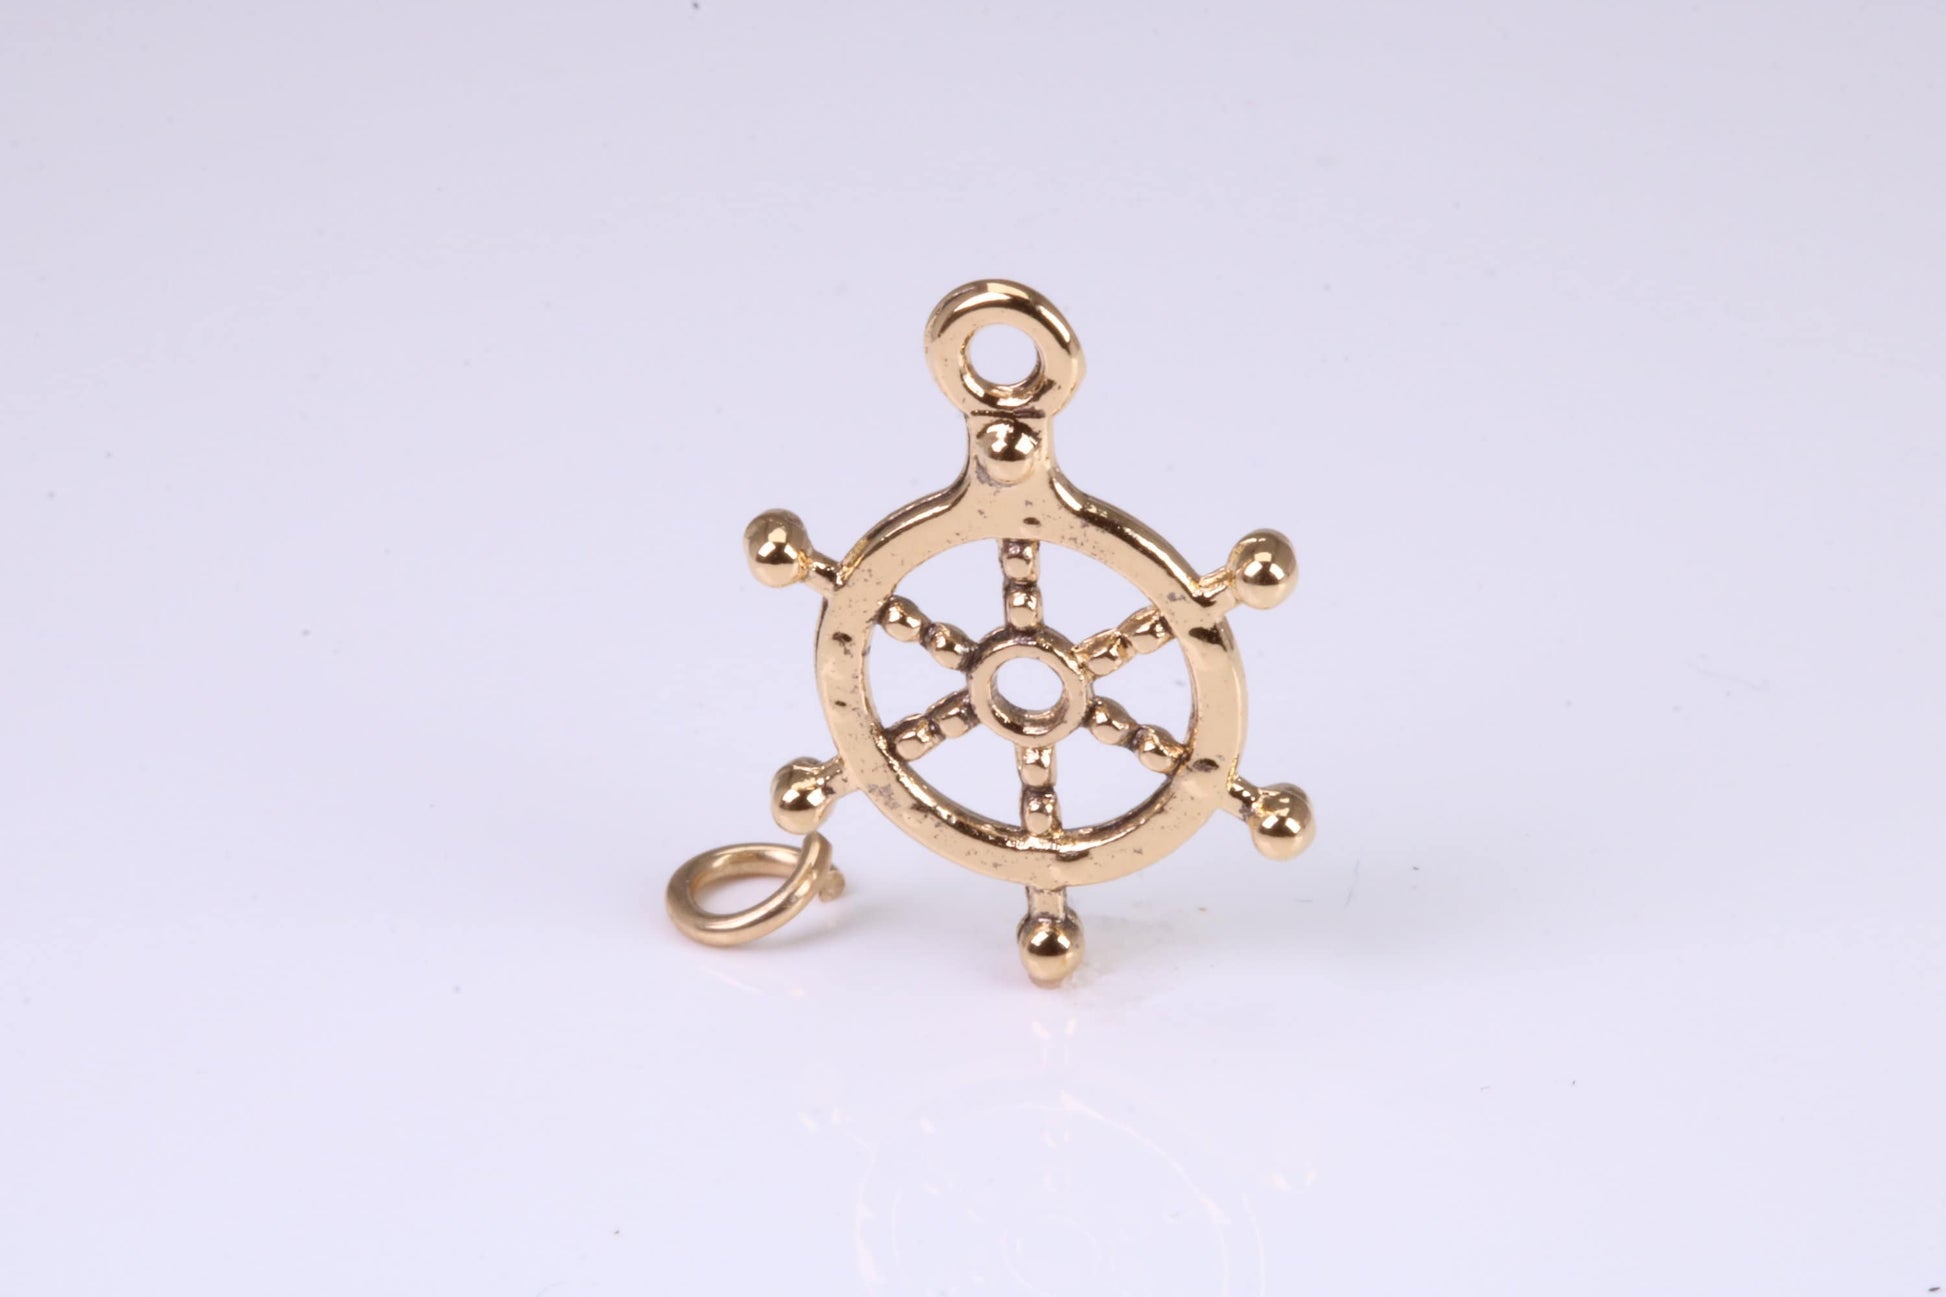 Helm Charm, Traditional Charm, Made from Solid Yellow Gold, British Hallmarked, Complete with Attachment Link